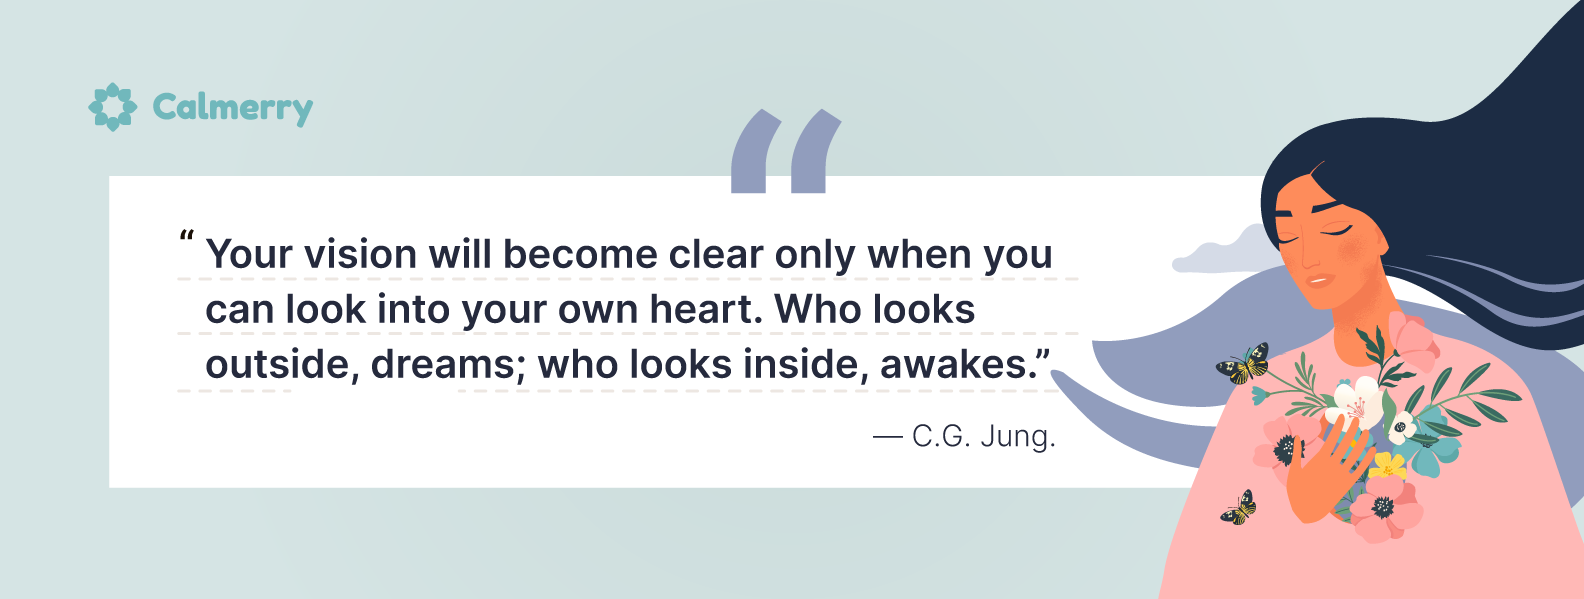 Carl Jung quote – Who looks outside, dreams. Who looks inside, awakes.